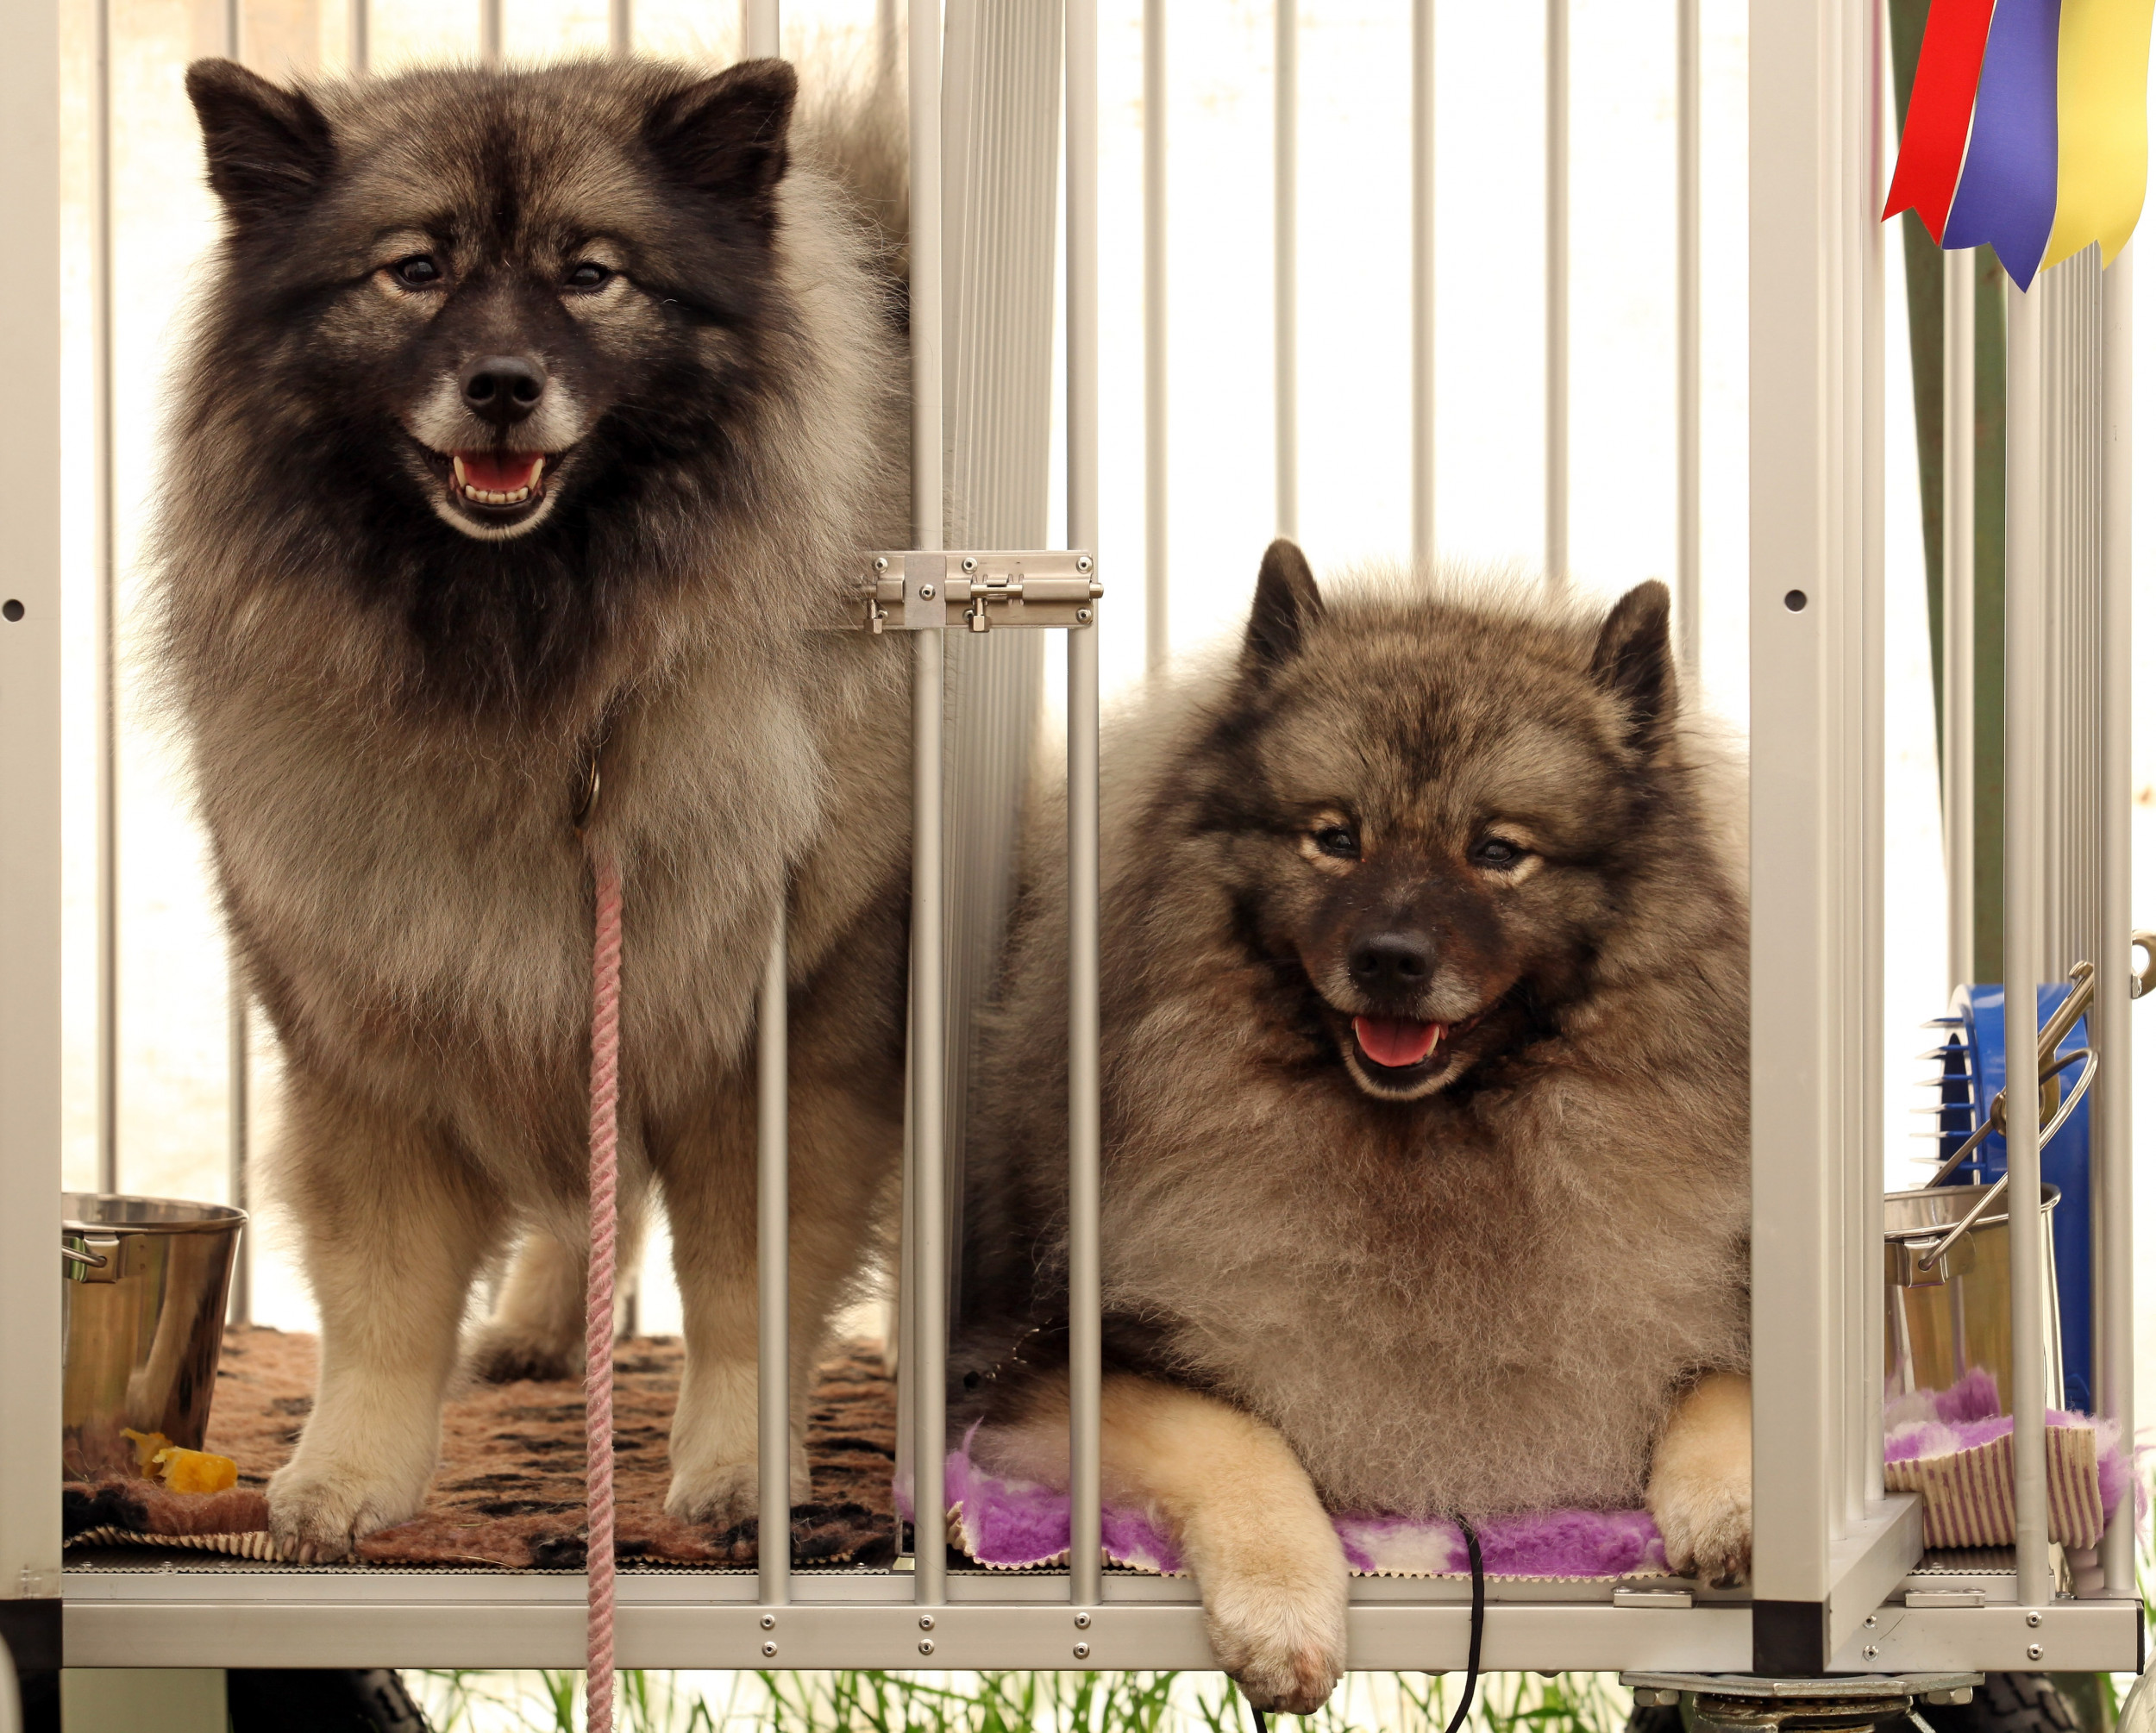 Two Keeshond dogs 